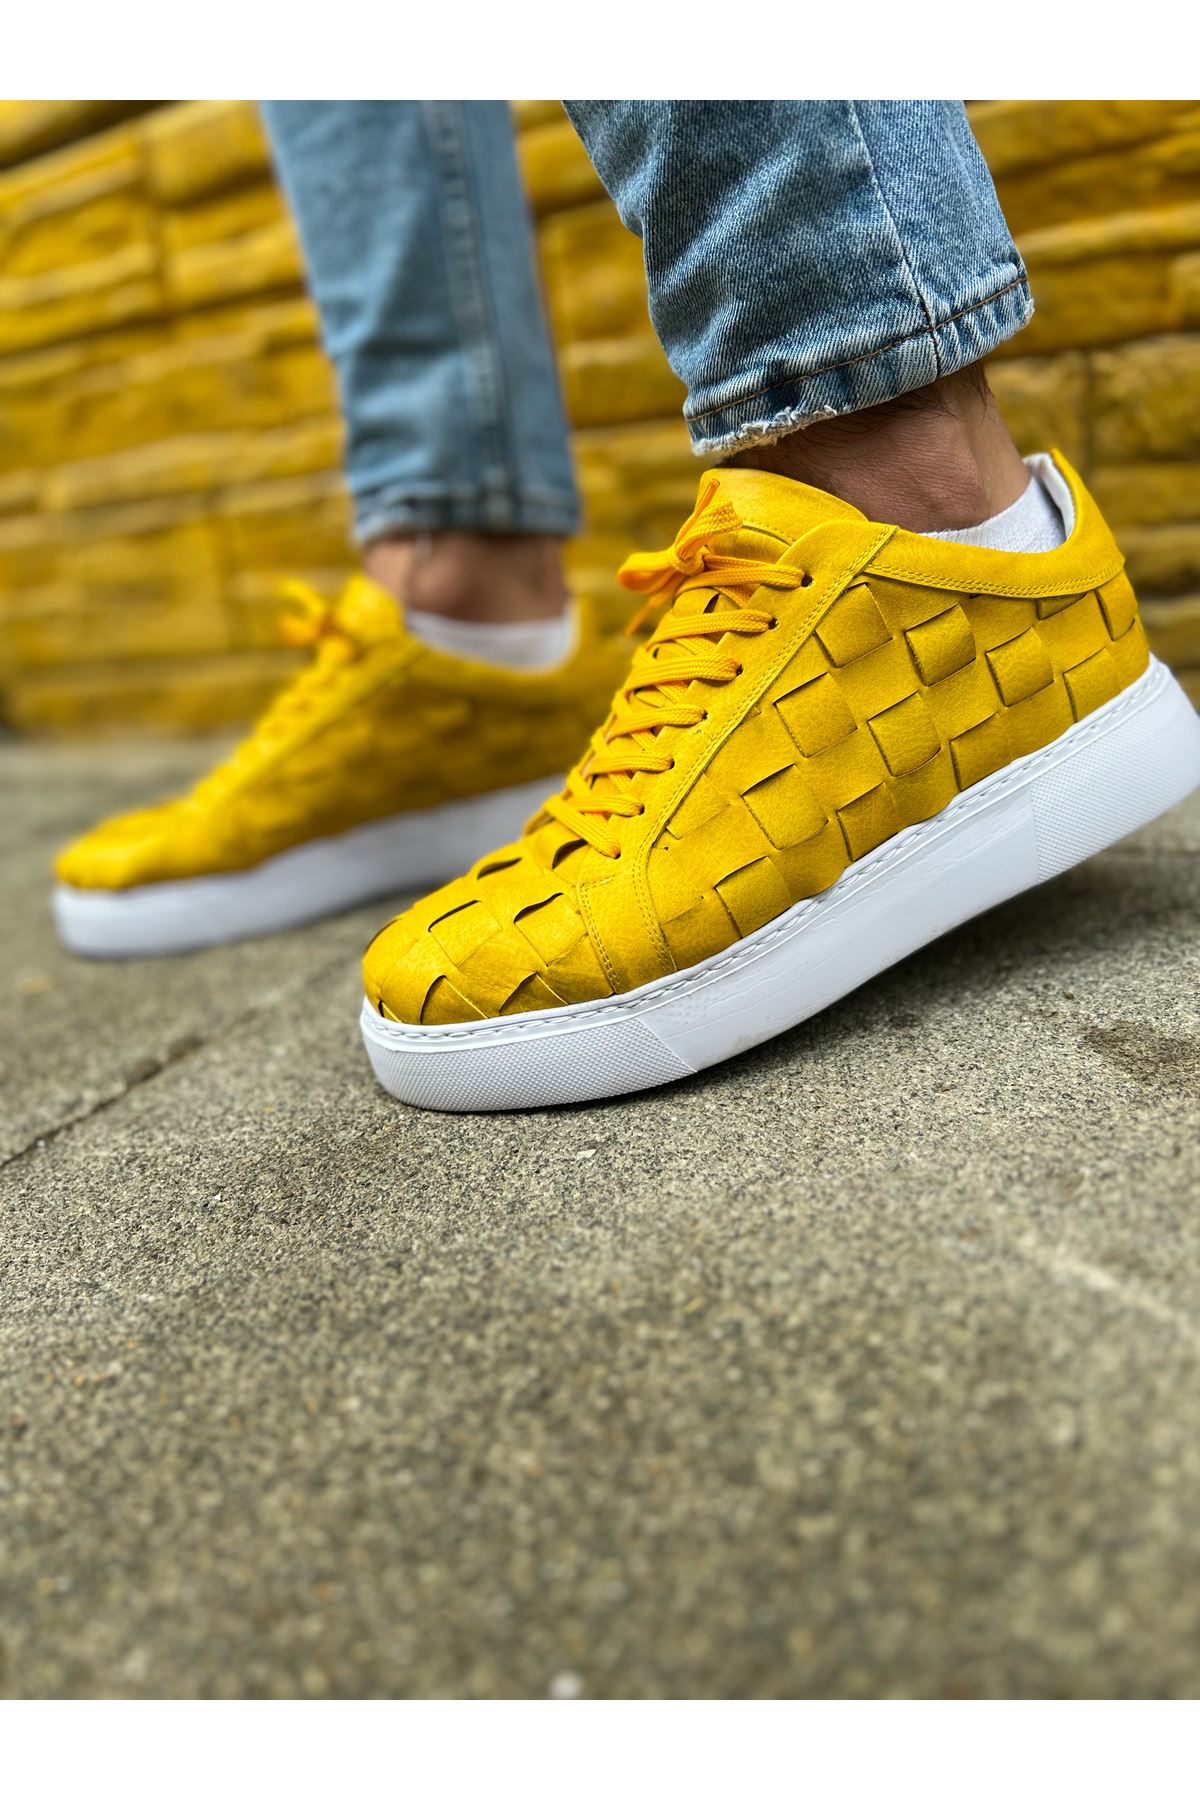 CH209 OBT Vimini Men's Shoes sneakers YELLOW - STREETMODE™